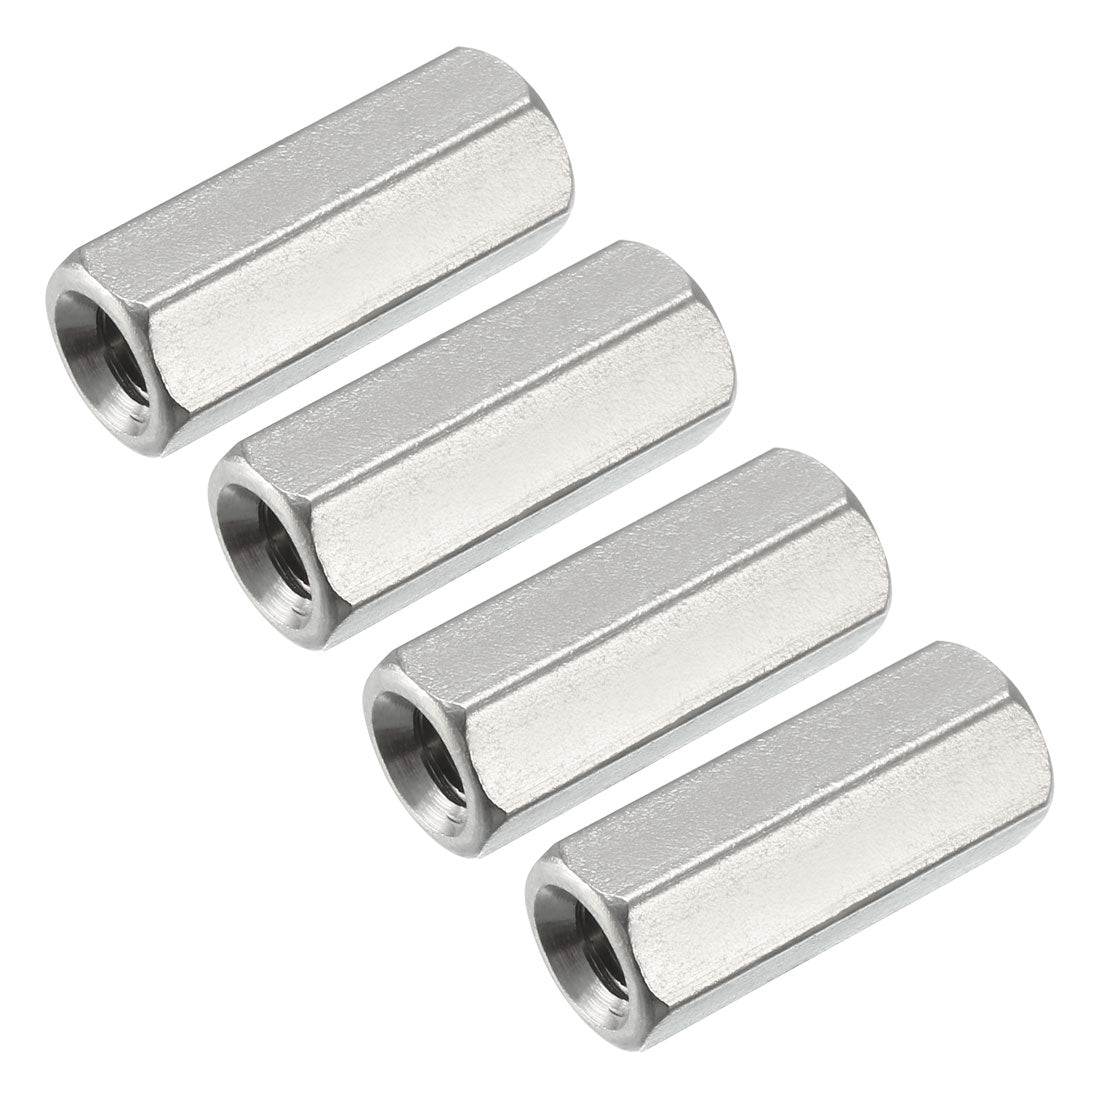 uxcell Uxcell M5 x 0.8-Pitch 20mm Length 304 Stainless Steel Metric Hex Coupling Nuts, 4 Pcs